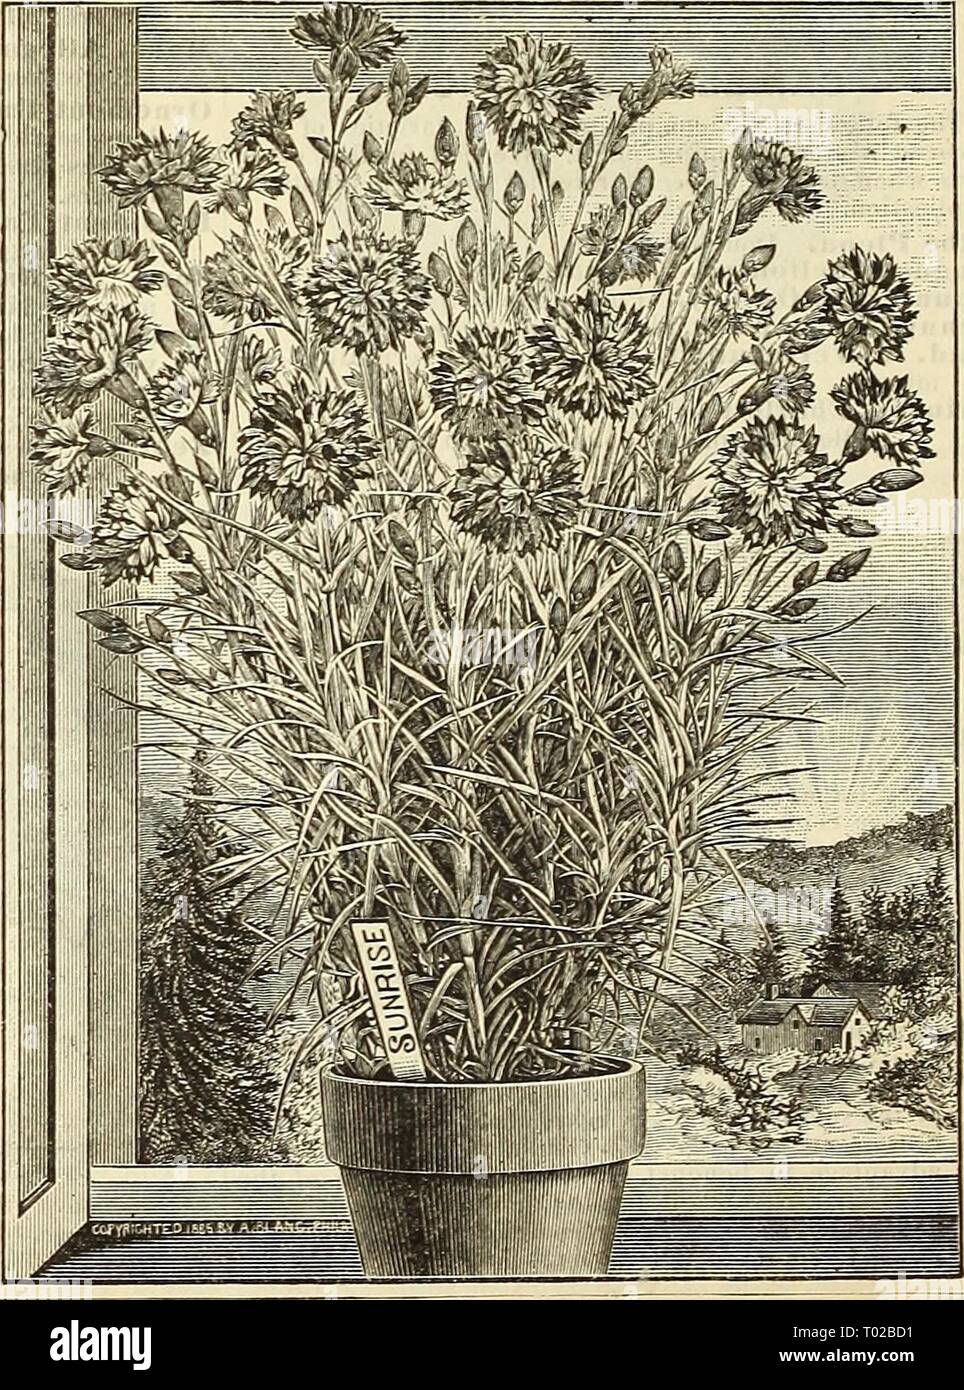 Dreer's garden calendar for 1887 . dreersgardencale1887henr Year: 1887  Buttercup.'' CARNATIONS. Buttercup. Rich golden yellow, with a few streaks of clear carmine; Of vigorous habit and very floriferous. The florets are large, full, and very double, from 2 to 3 inches in diameter. Dawn. This is a new departure in Carnations, being neither what is called a straight or solid color, or variegated, but a blending from the centre of the flower outwards, of a soft delicate pink or rose color to pure white at the edge, delightful fragrance. Field of Gold. This is a pure yellow Carnation of strong g Stock Photo